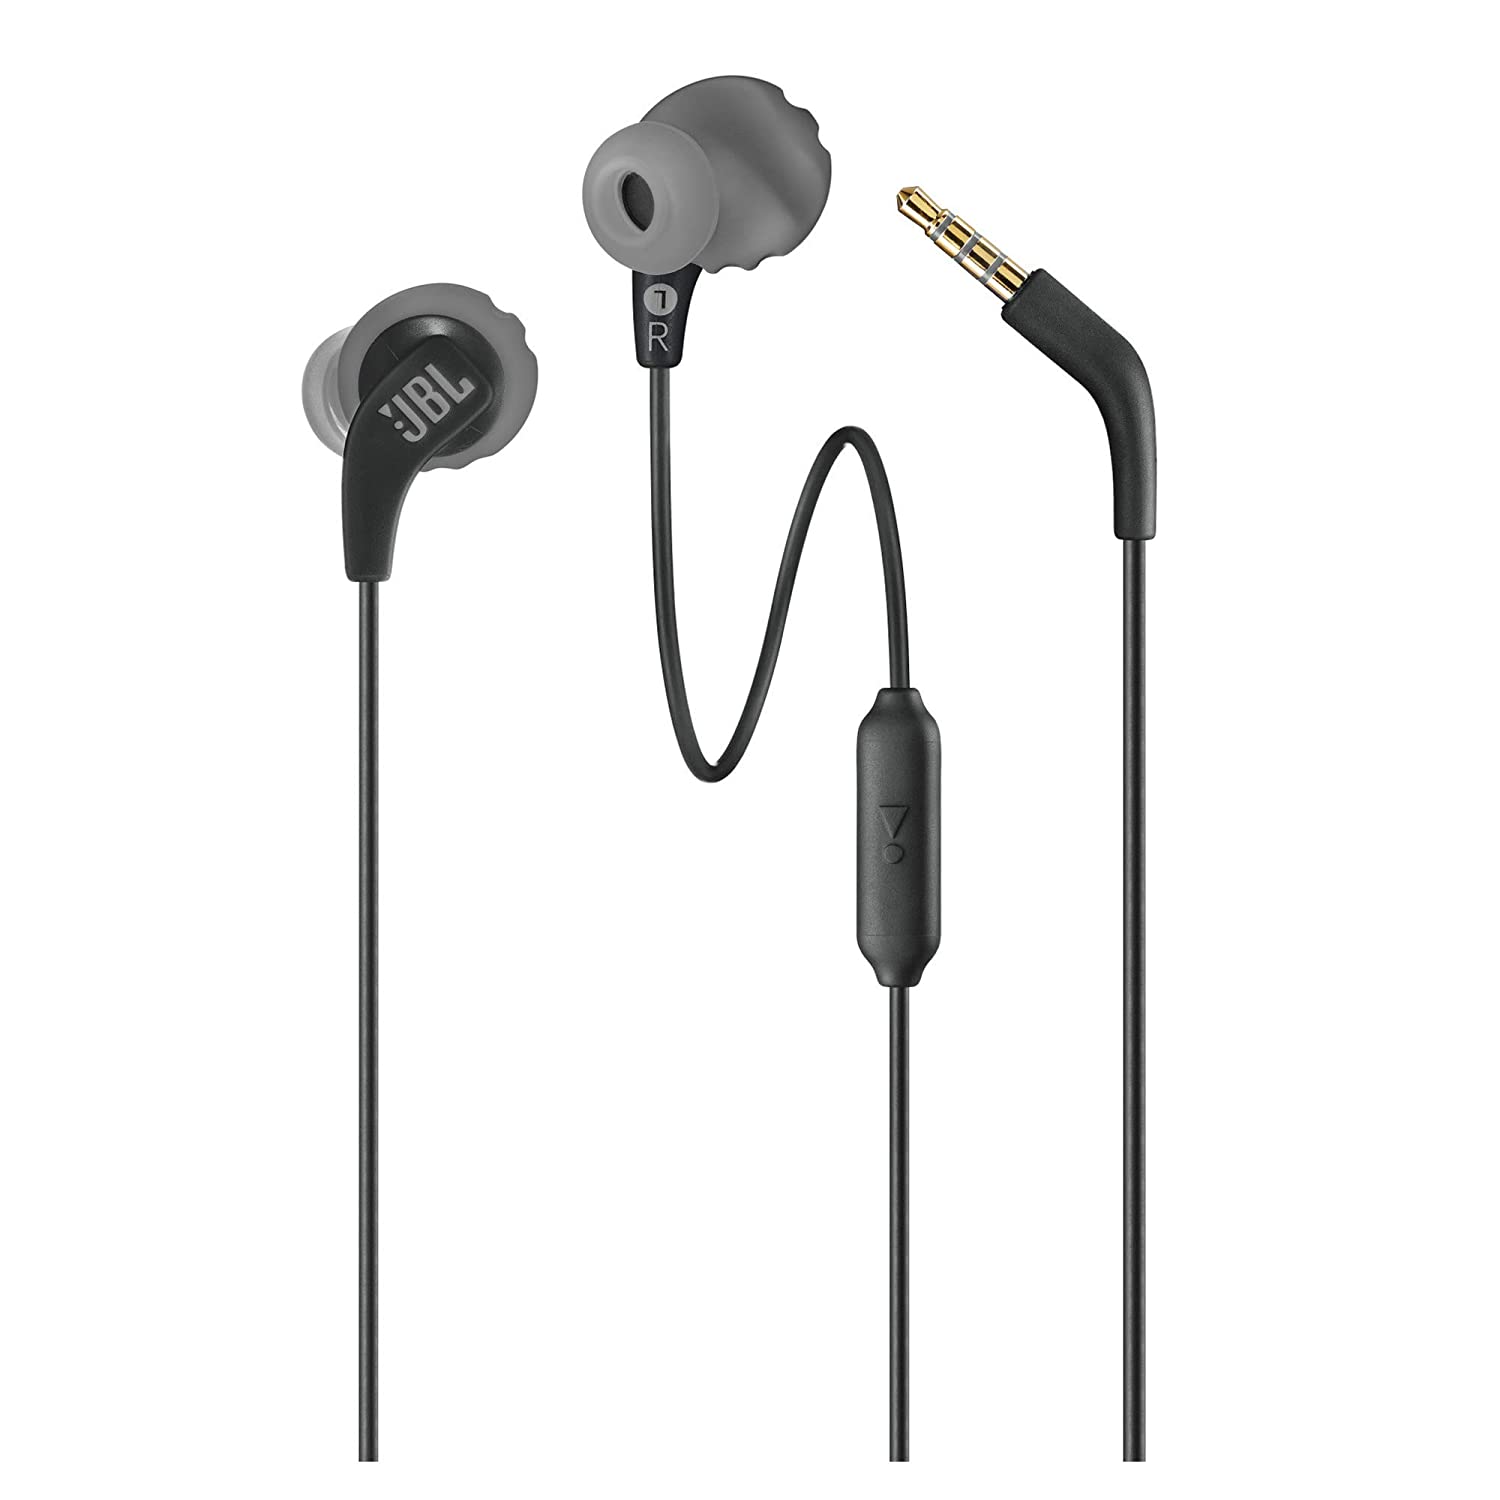 JBL Endurance Run by Harman (Sweat-Proof Sports in-Ear Headphones with One-Button Remote and Microphone)